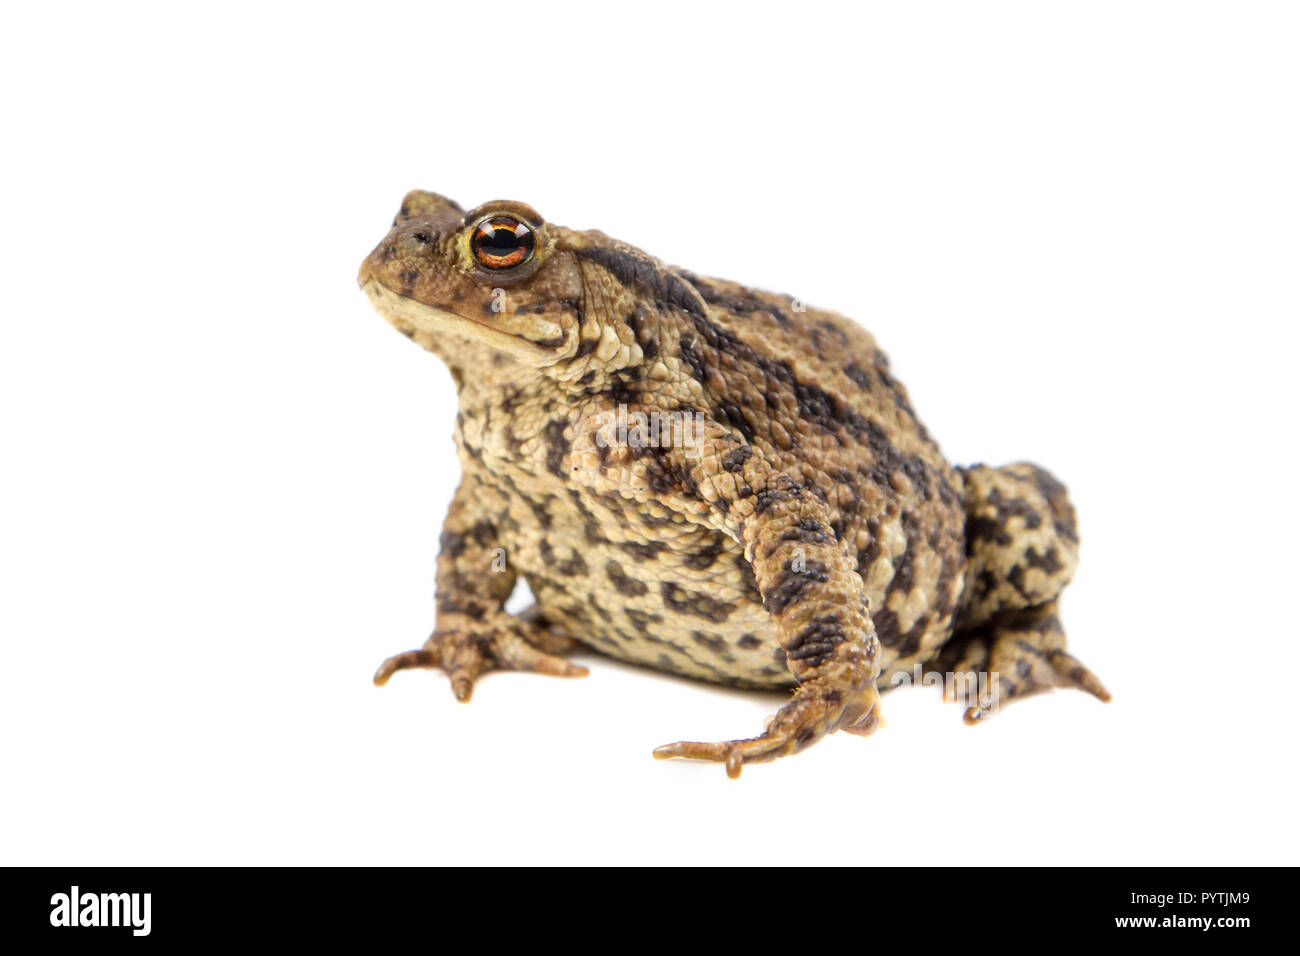 European common toad (Bufo bufo) isolated on white background Stock Photo